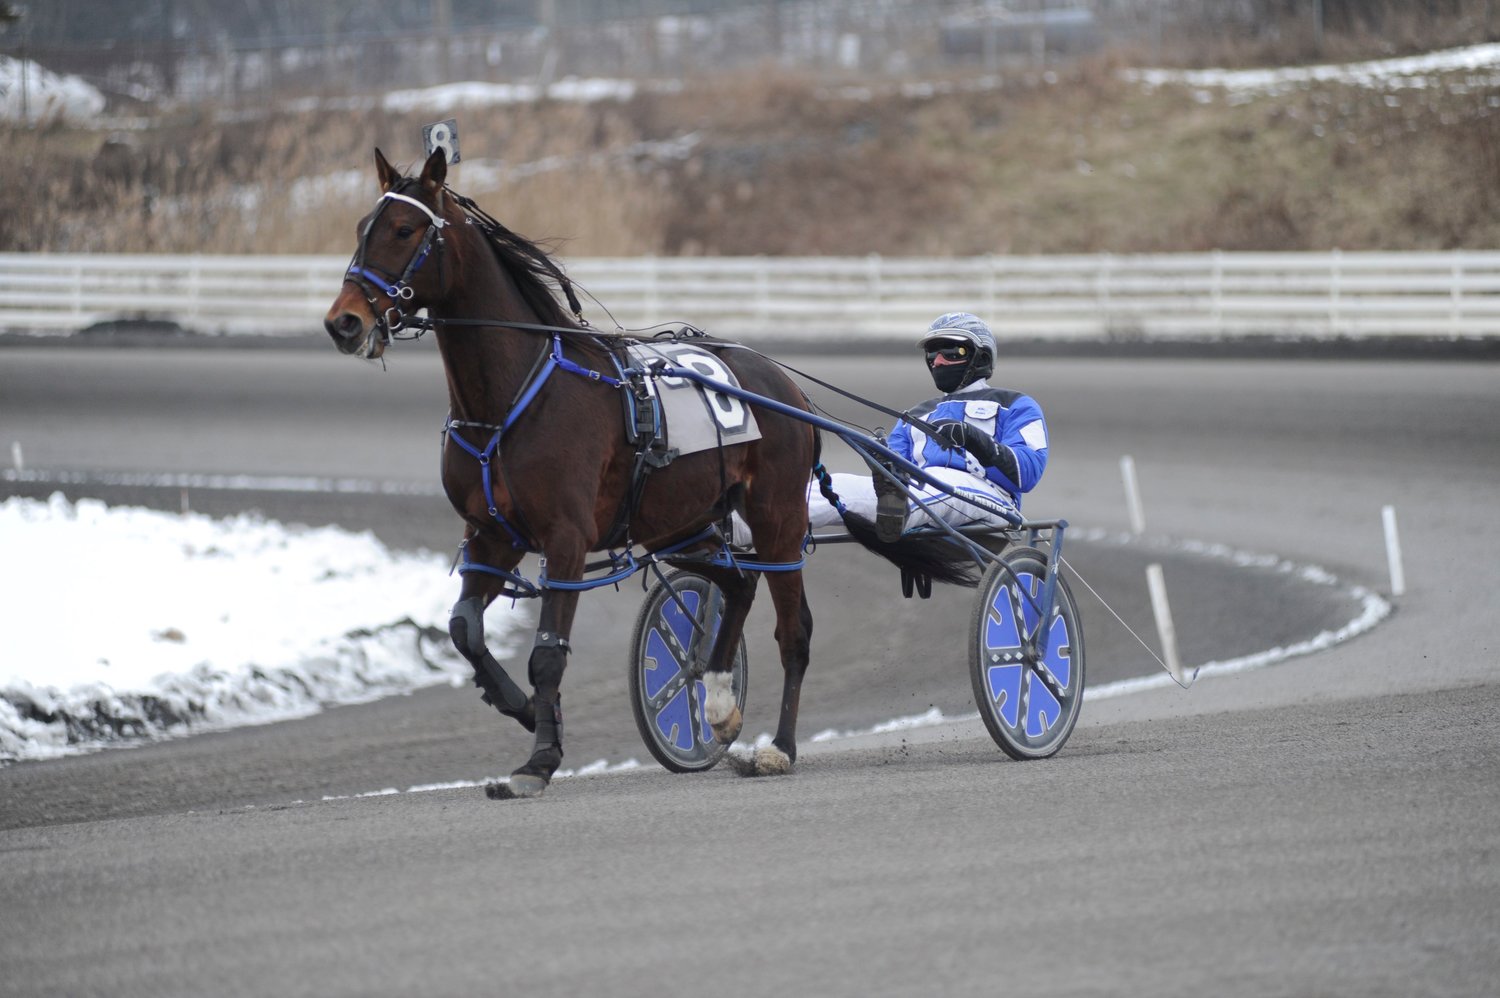 Warm-up time. Driver Mike Merton finished fourth in the third race of the afternoon with a time of 1:56.3. Real Lucky is trained by Rob Harmon and owned by Harmon Stables of Milford, PA.